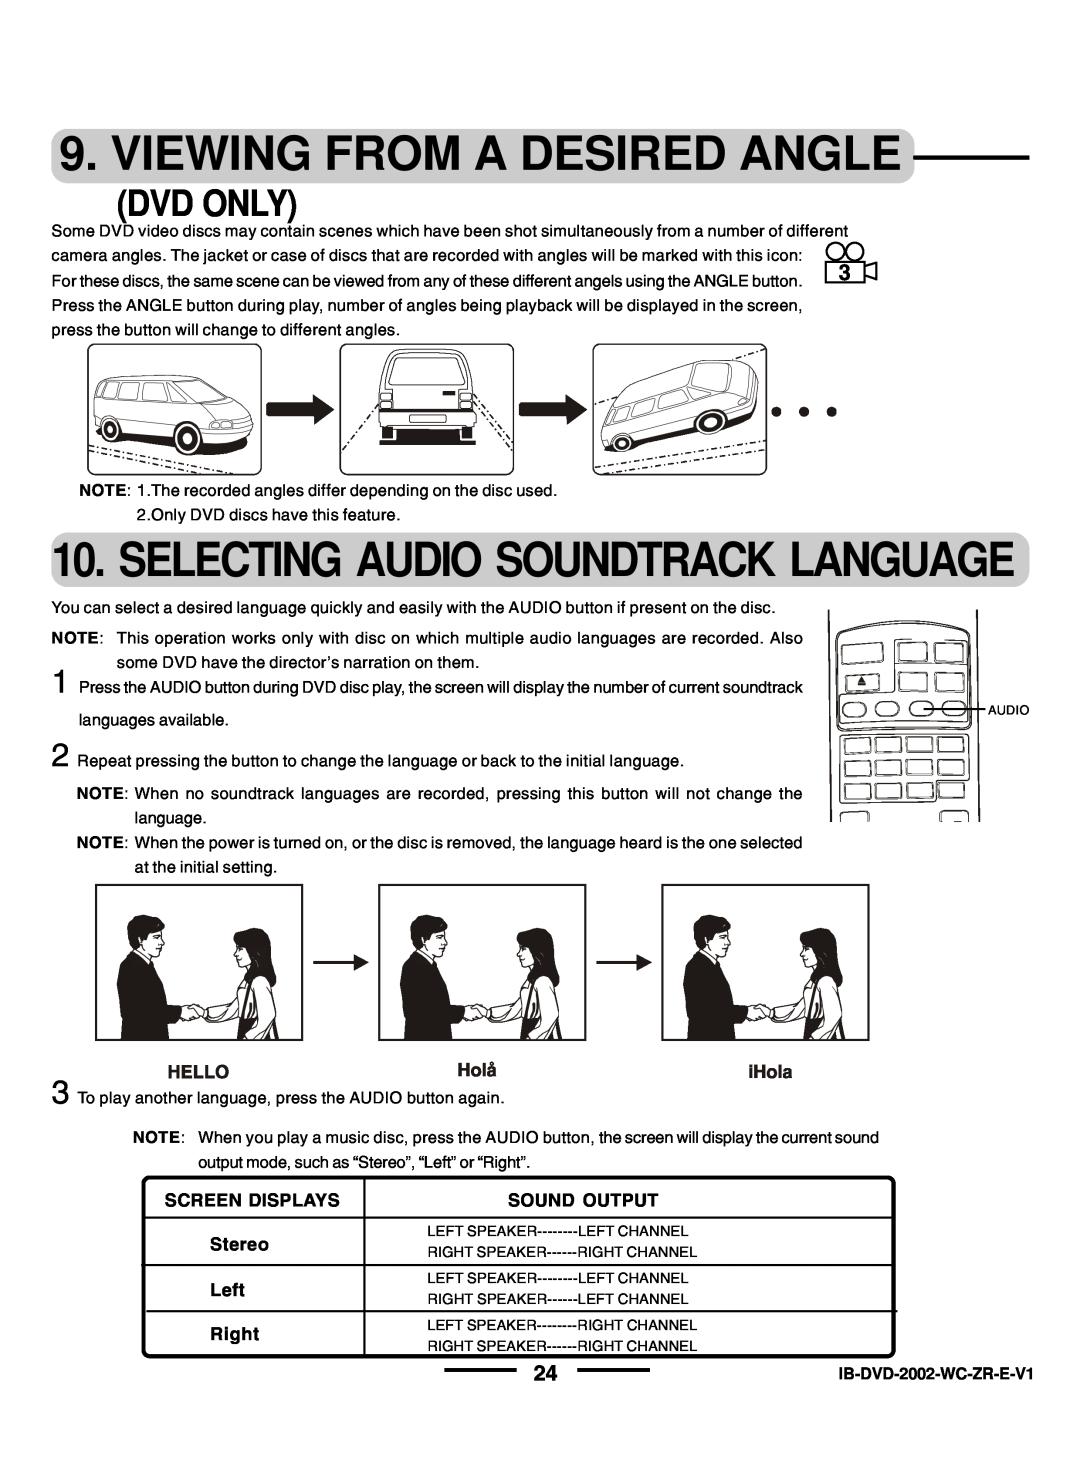 Lenoxx Electronics DVD-2002 instruction manual Viewing From A Desired Angle, Dvd Only, Selecting Audio Soundtrack Language 